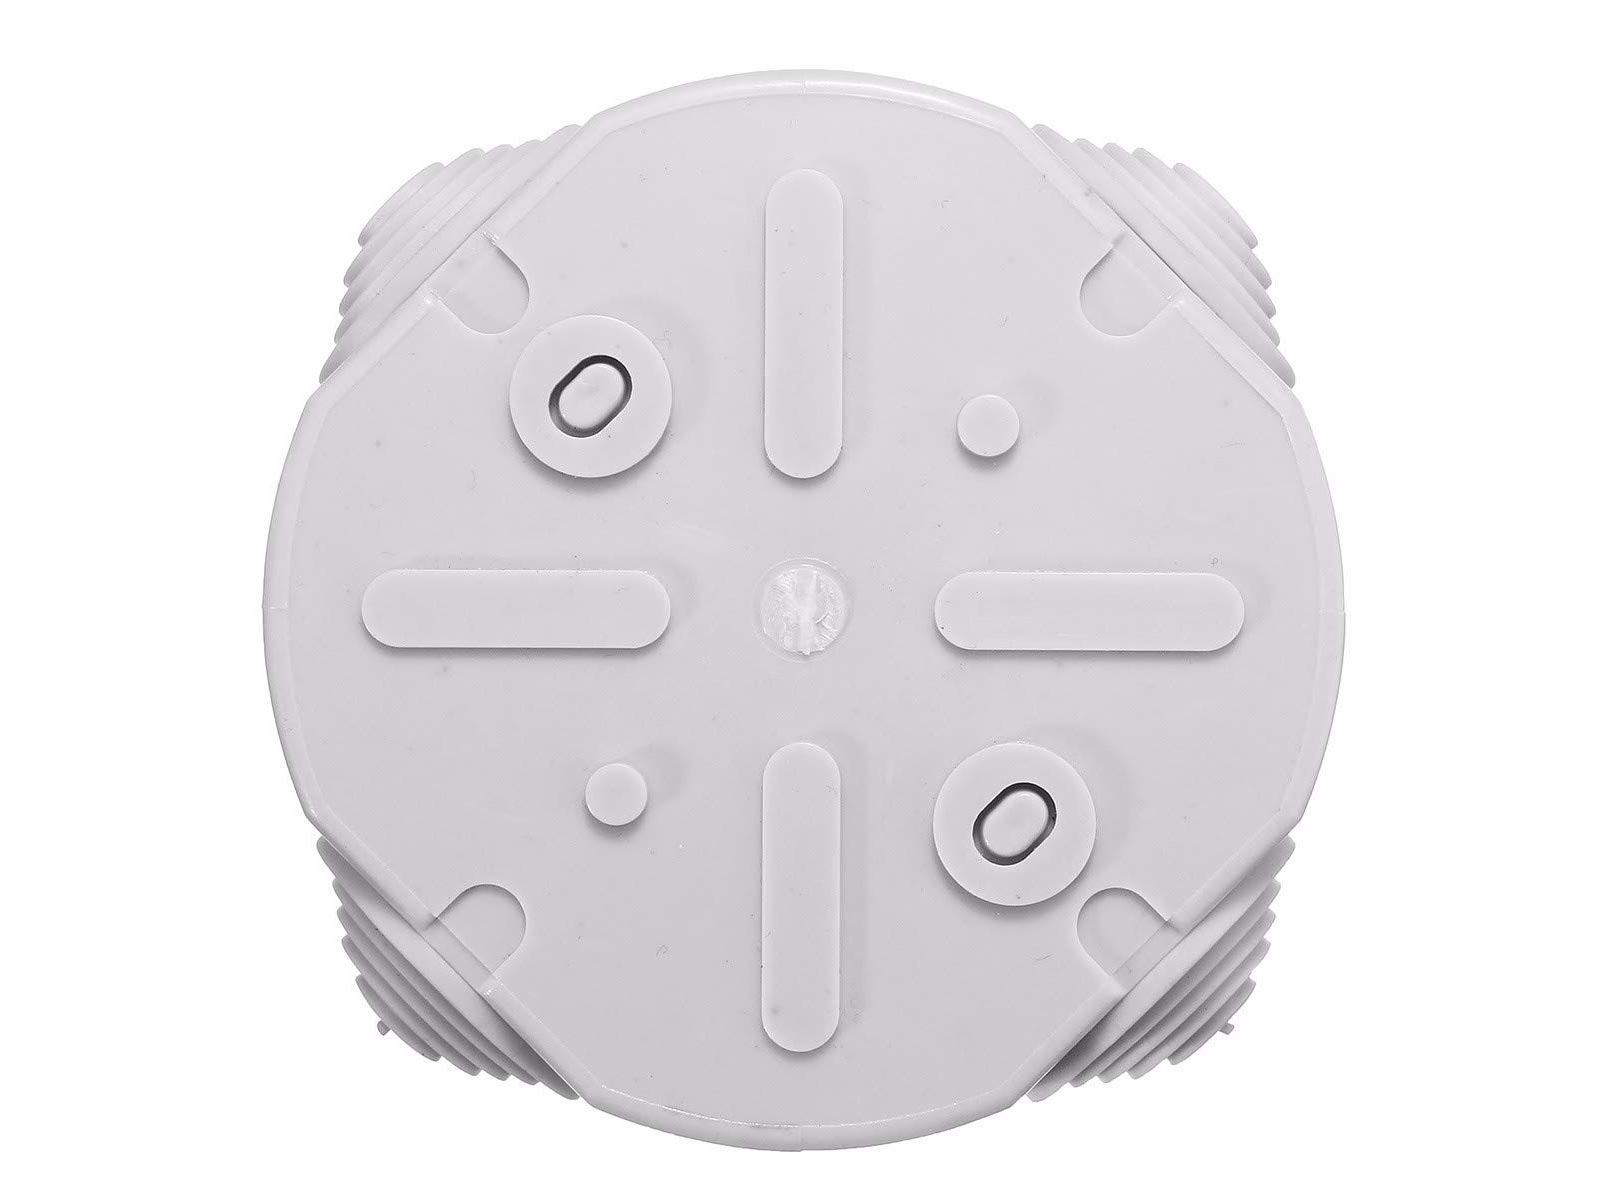 ESR R080 80mm x 35mm IP44 Round Electrical Junction Box with Rubber Cable Entry Grommets Snap-on Lid Splashproof Weatherproof CCTV Cable Connection